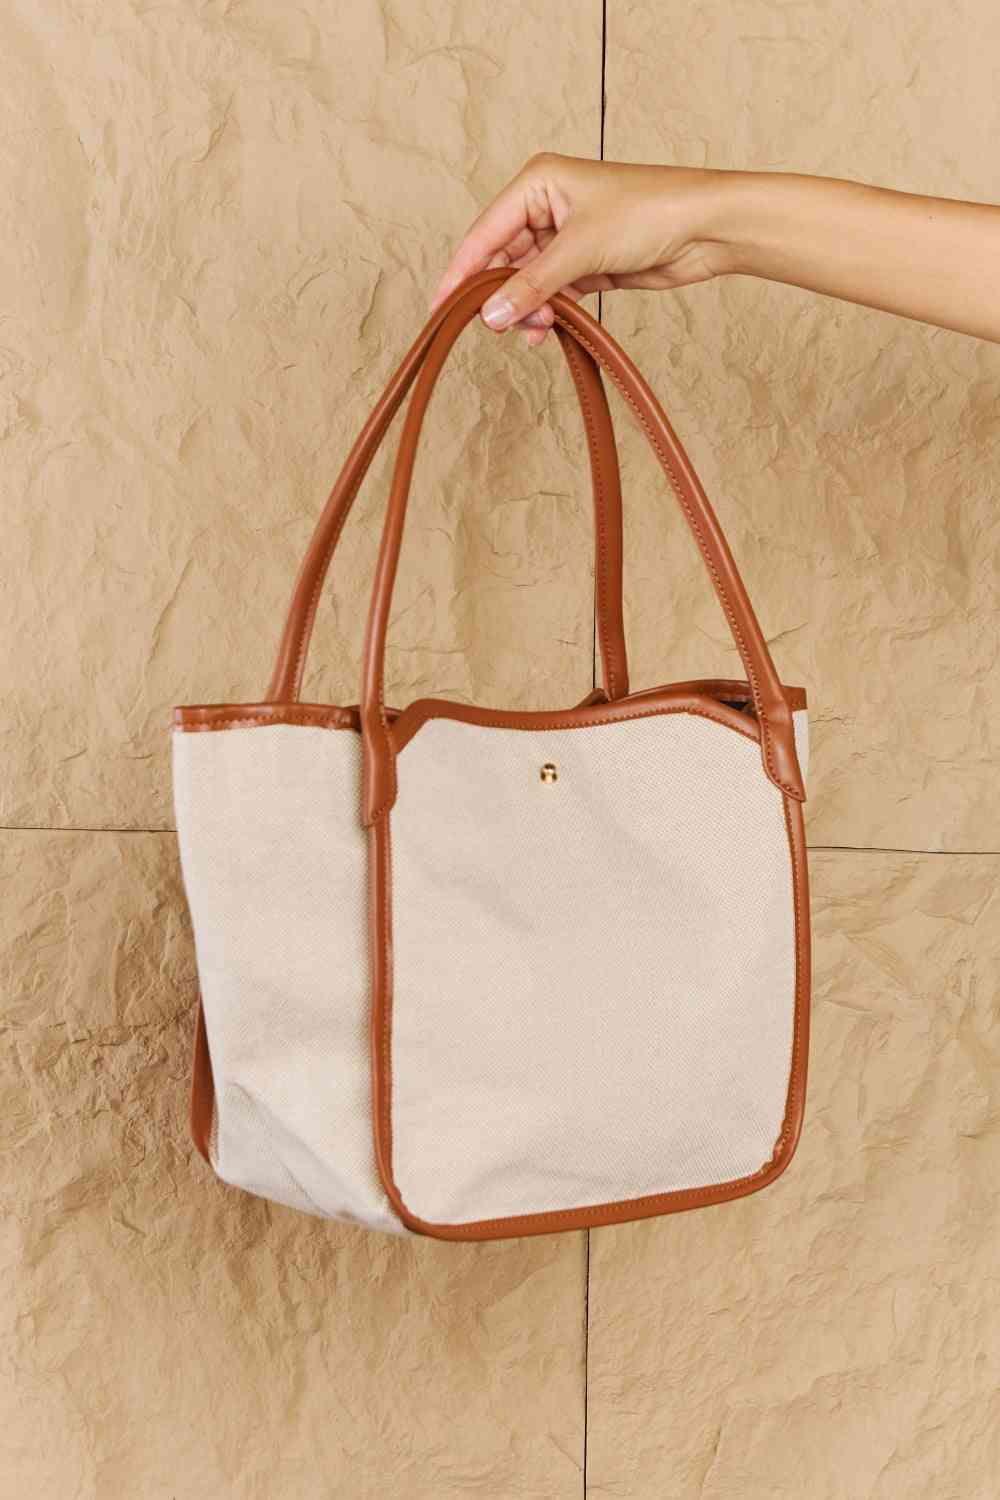 Fame Beach Chic Faux Leather Trim Tote Bag in Ochre - Handbag - FITGGINS